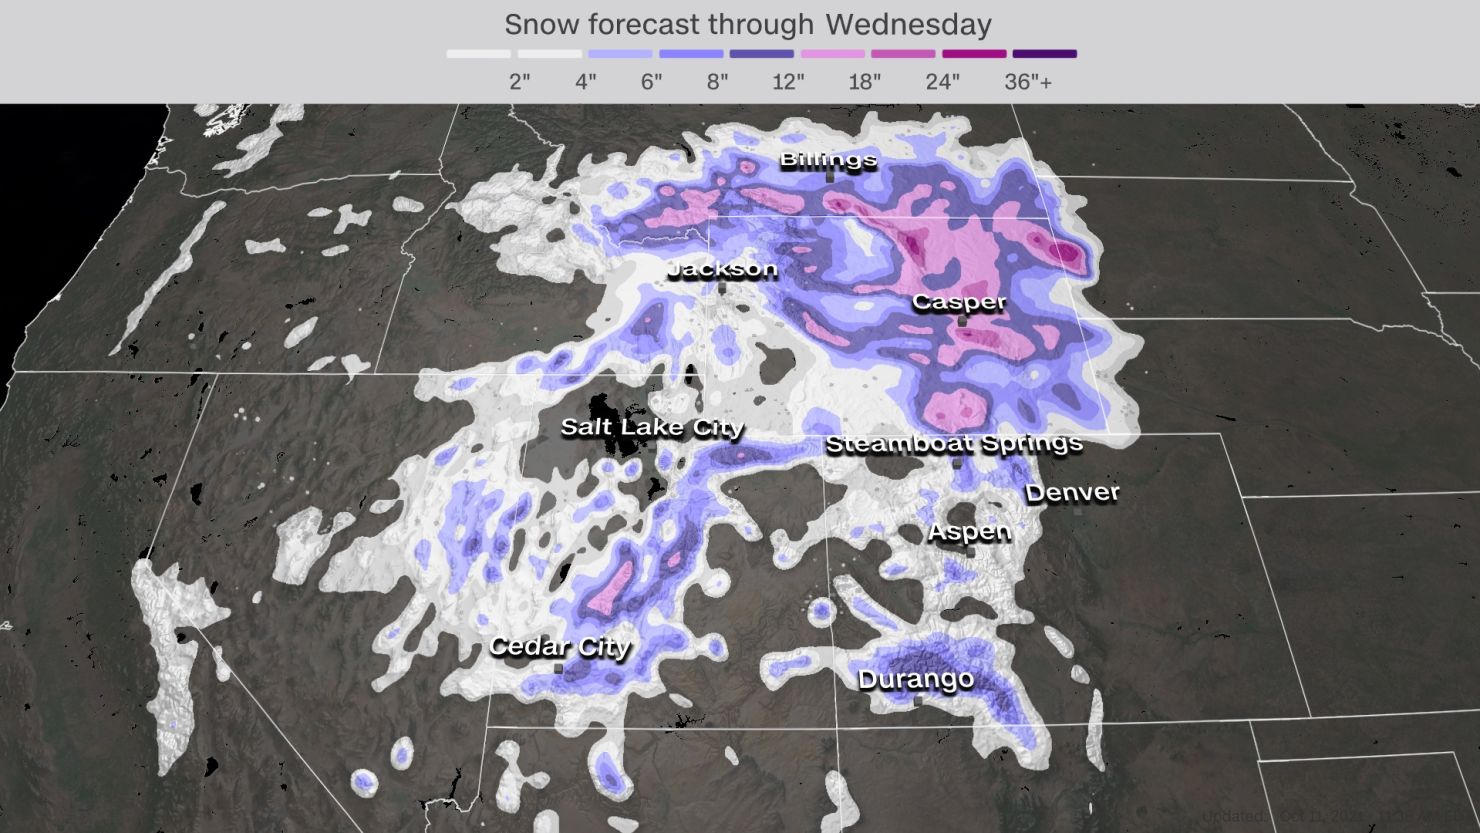 Snowfall totals expected for the Rockies through Wednesday